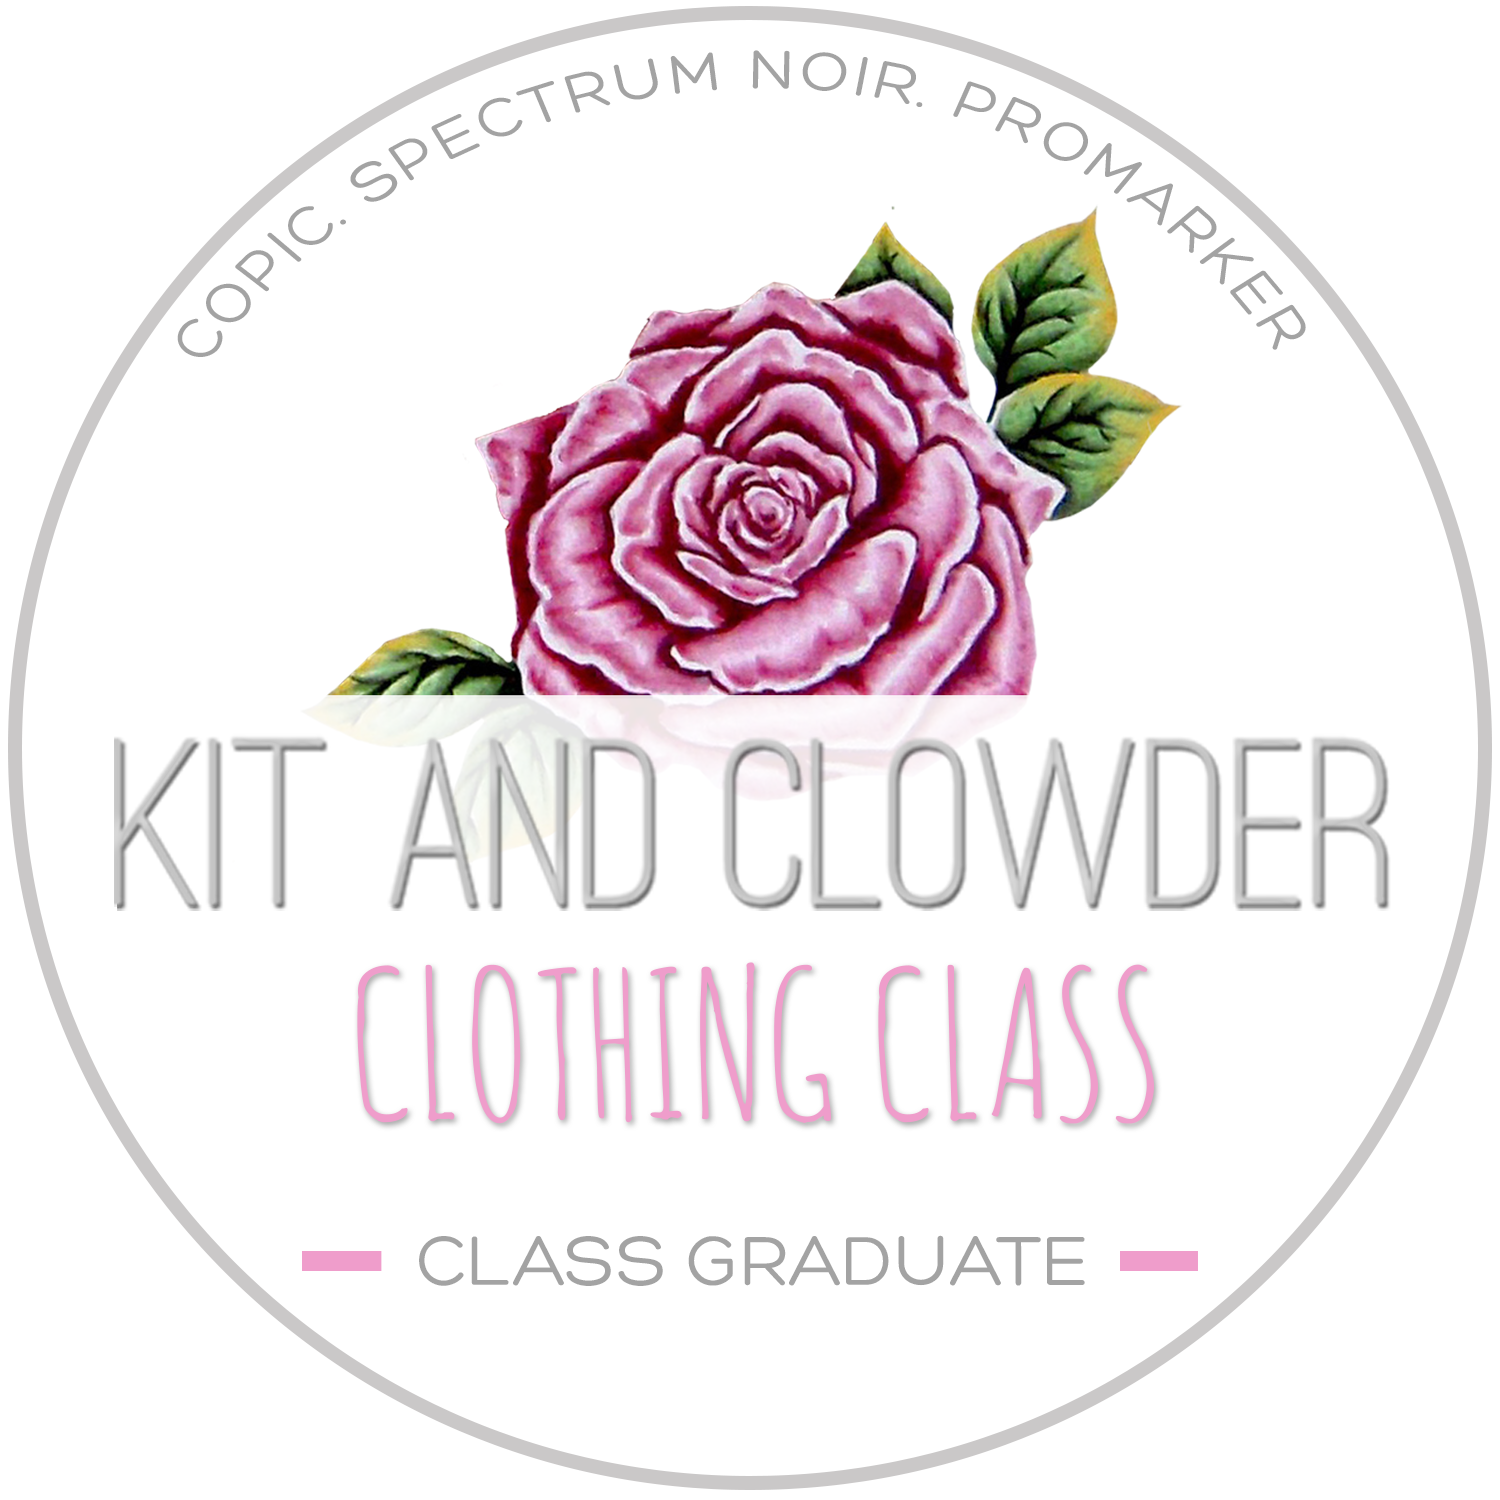 Kit and Clowder Clothing Technique Class Graduate